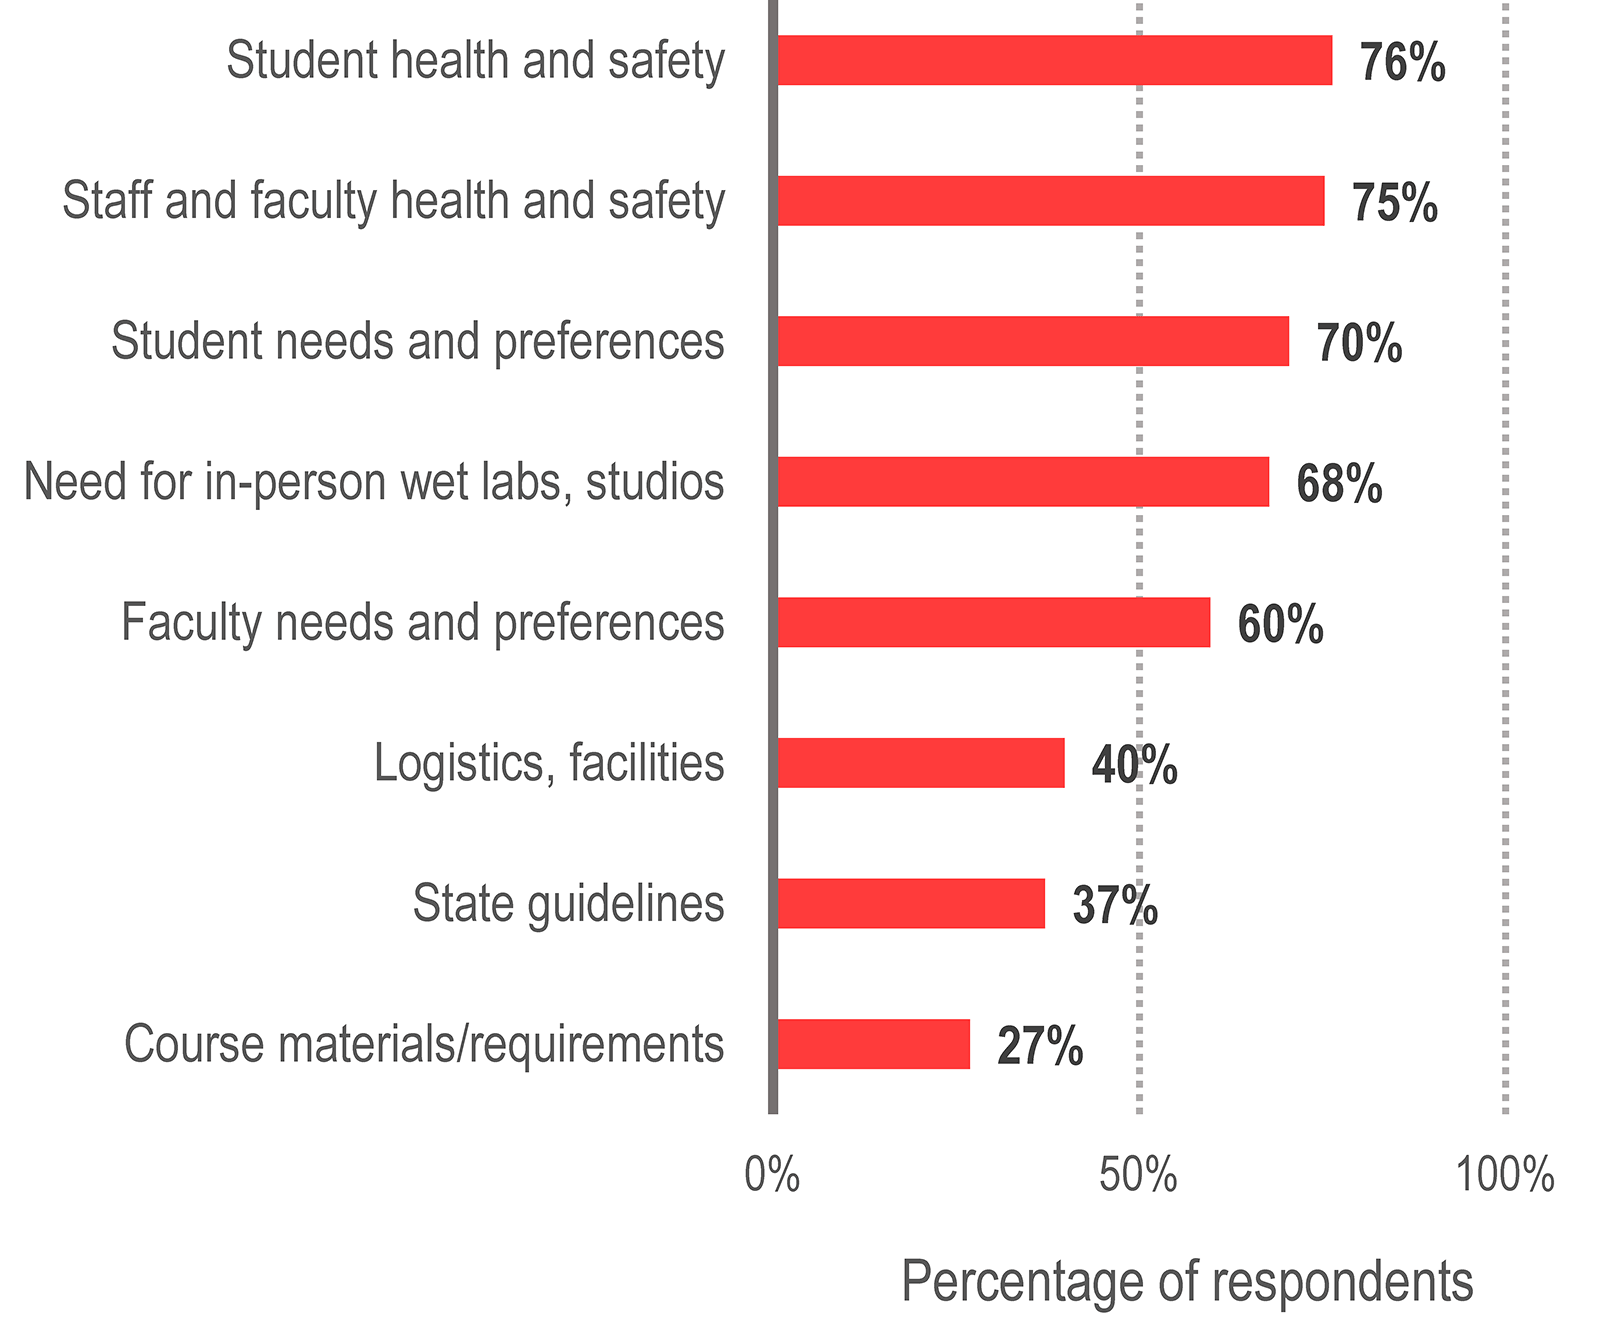 Bar graph showing the percentage of respondents that said each category was one of the primary motivations for offering hybrid courses.
Student health and safety 76%. Staff and faculty health and safety 75%. Student needs and preferences 70%. Need for in-person wet labs, studios 68%. Faculty needs and preferences 60%. Logistics, facilities 40%. State guidelines 37%. Course materials/requirements 27%.